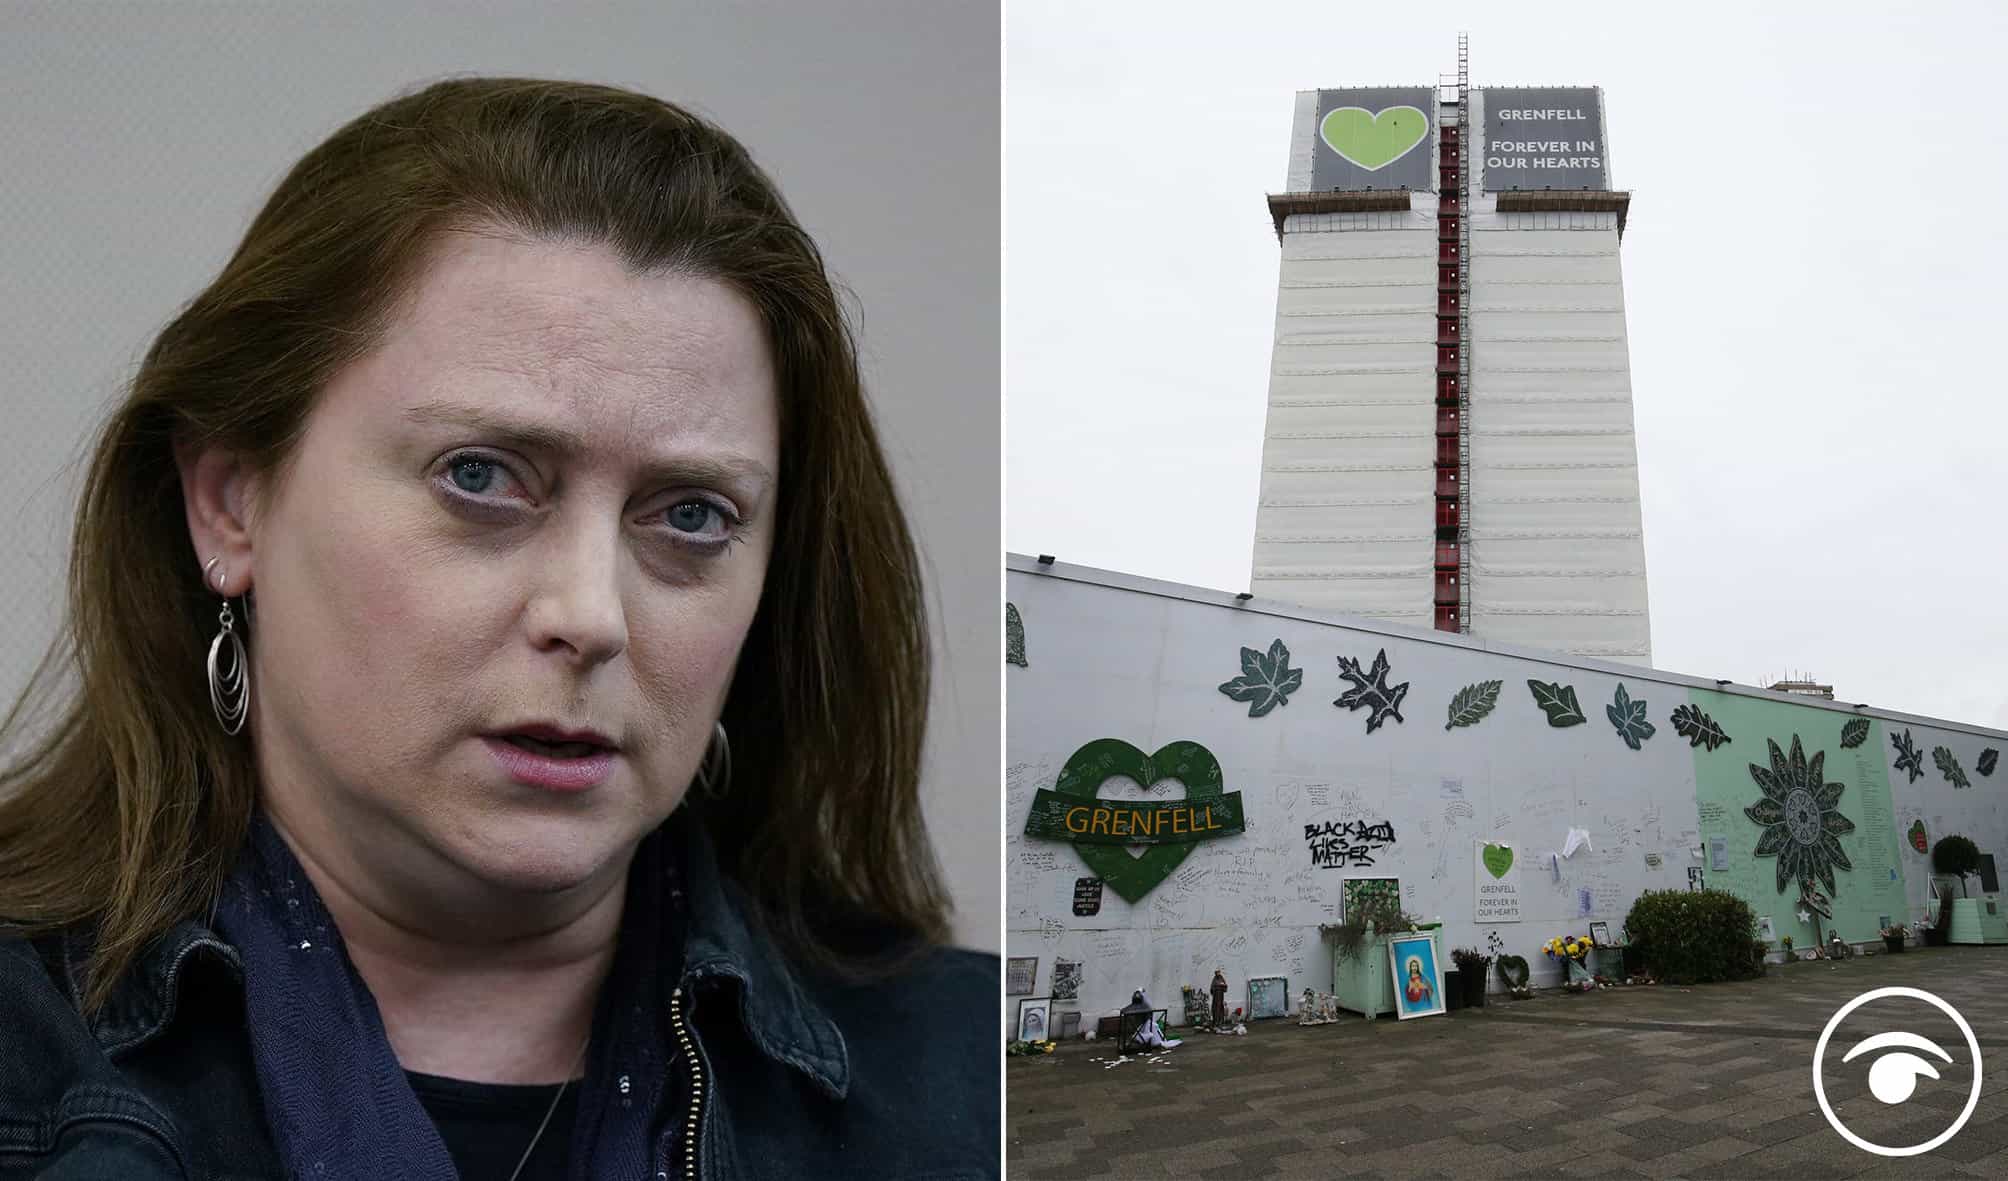 Watch: Grenfell community member joined council after seeing ‘at best neglect & at worst conscious cruelty’